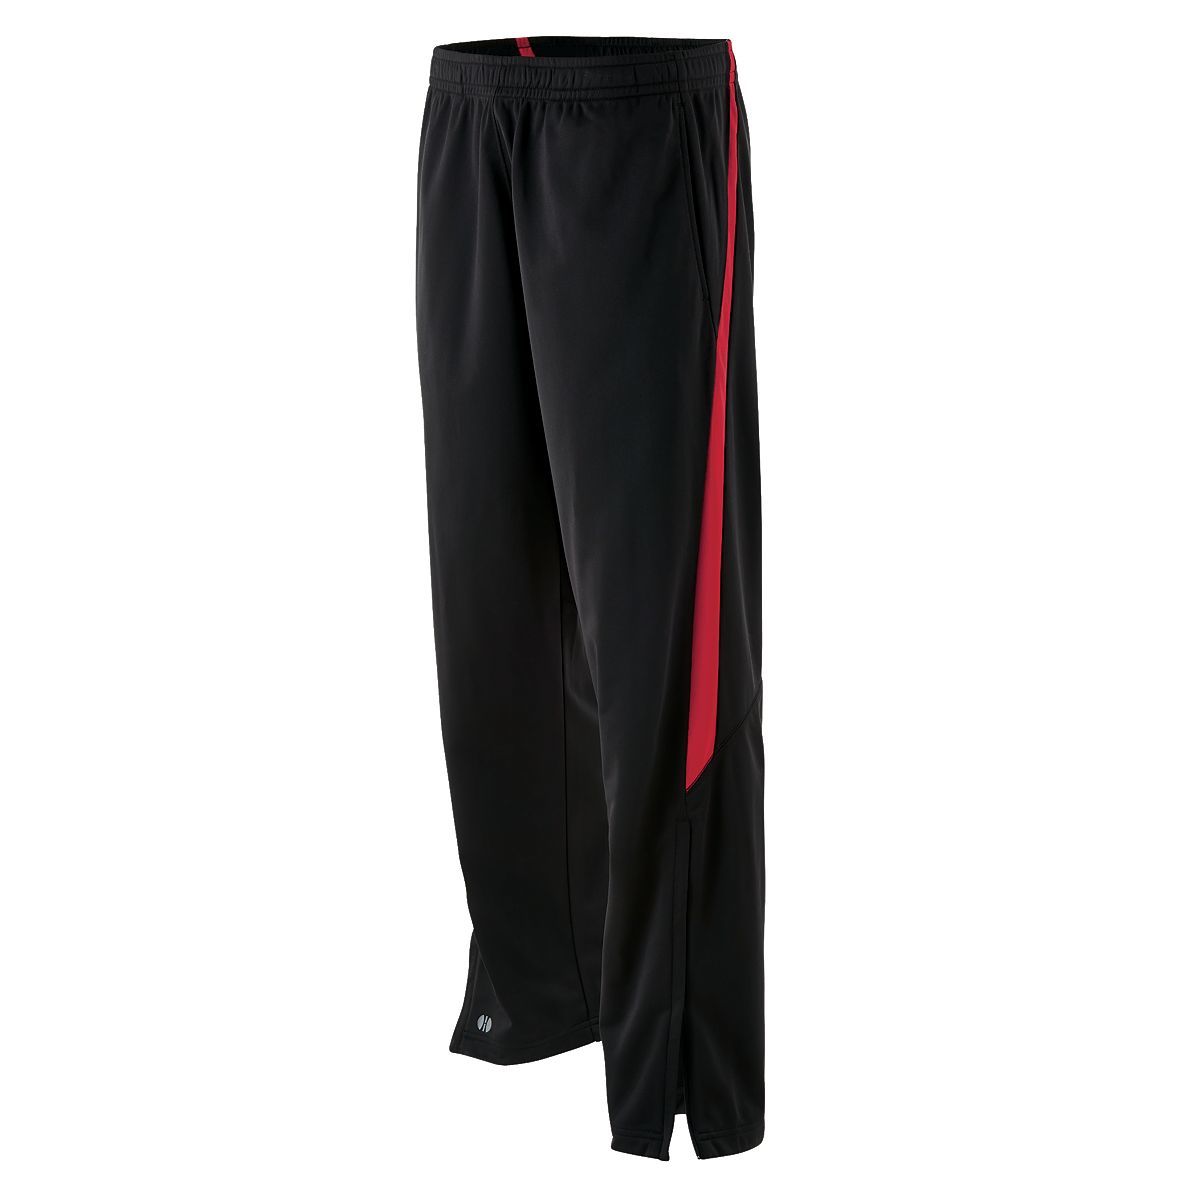 Holloway Determination Pant in Black/Scarlet  -Part of the Adult, Adult-Pants, Pants, Holloway product lines at KanaleyCreations.com